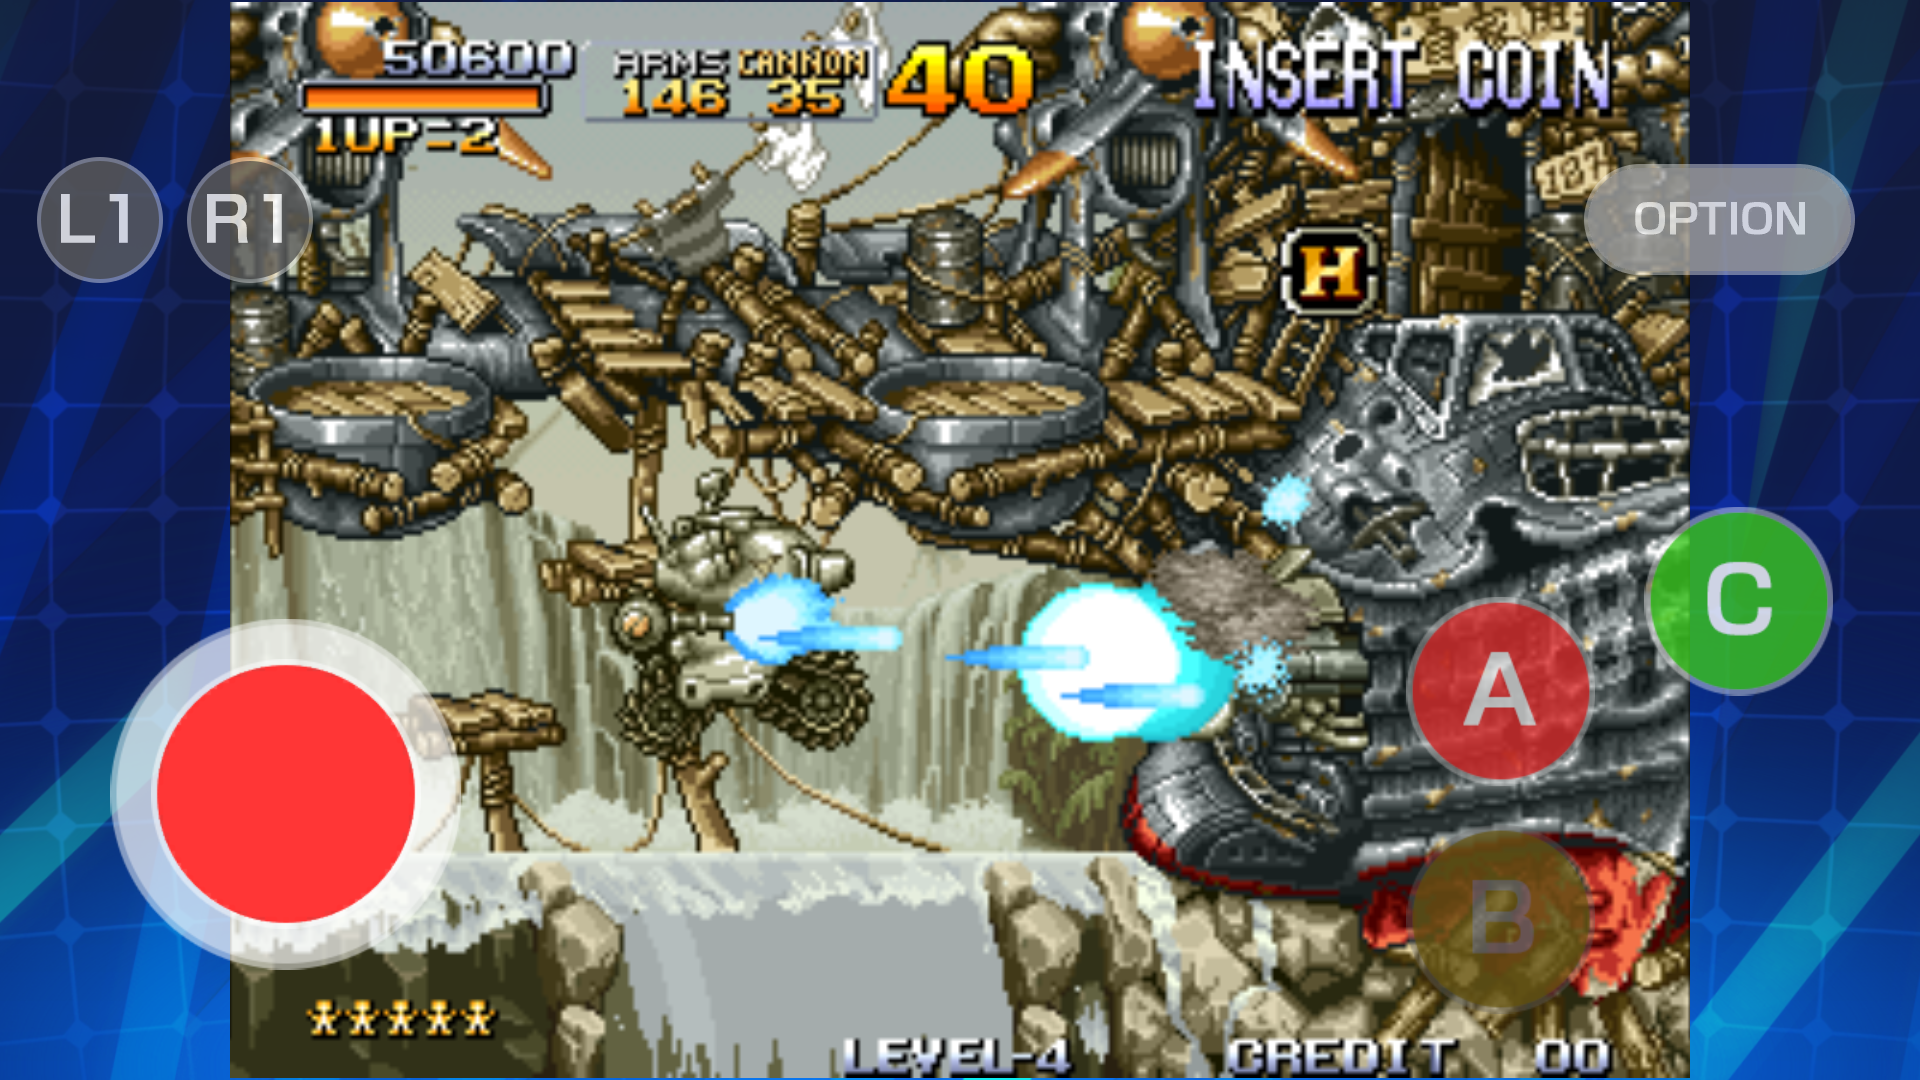 1996-Released Classic Run and Gun Game ‘Metal Slug’ ACA NeoGeo From SNK and Hamster Is Out Now on iOS and Android – TouchArcade